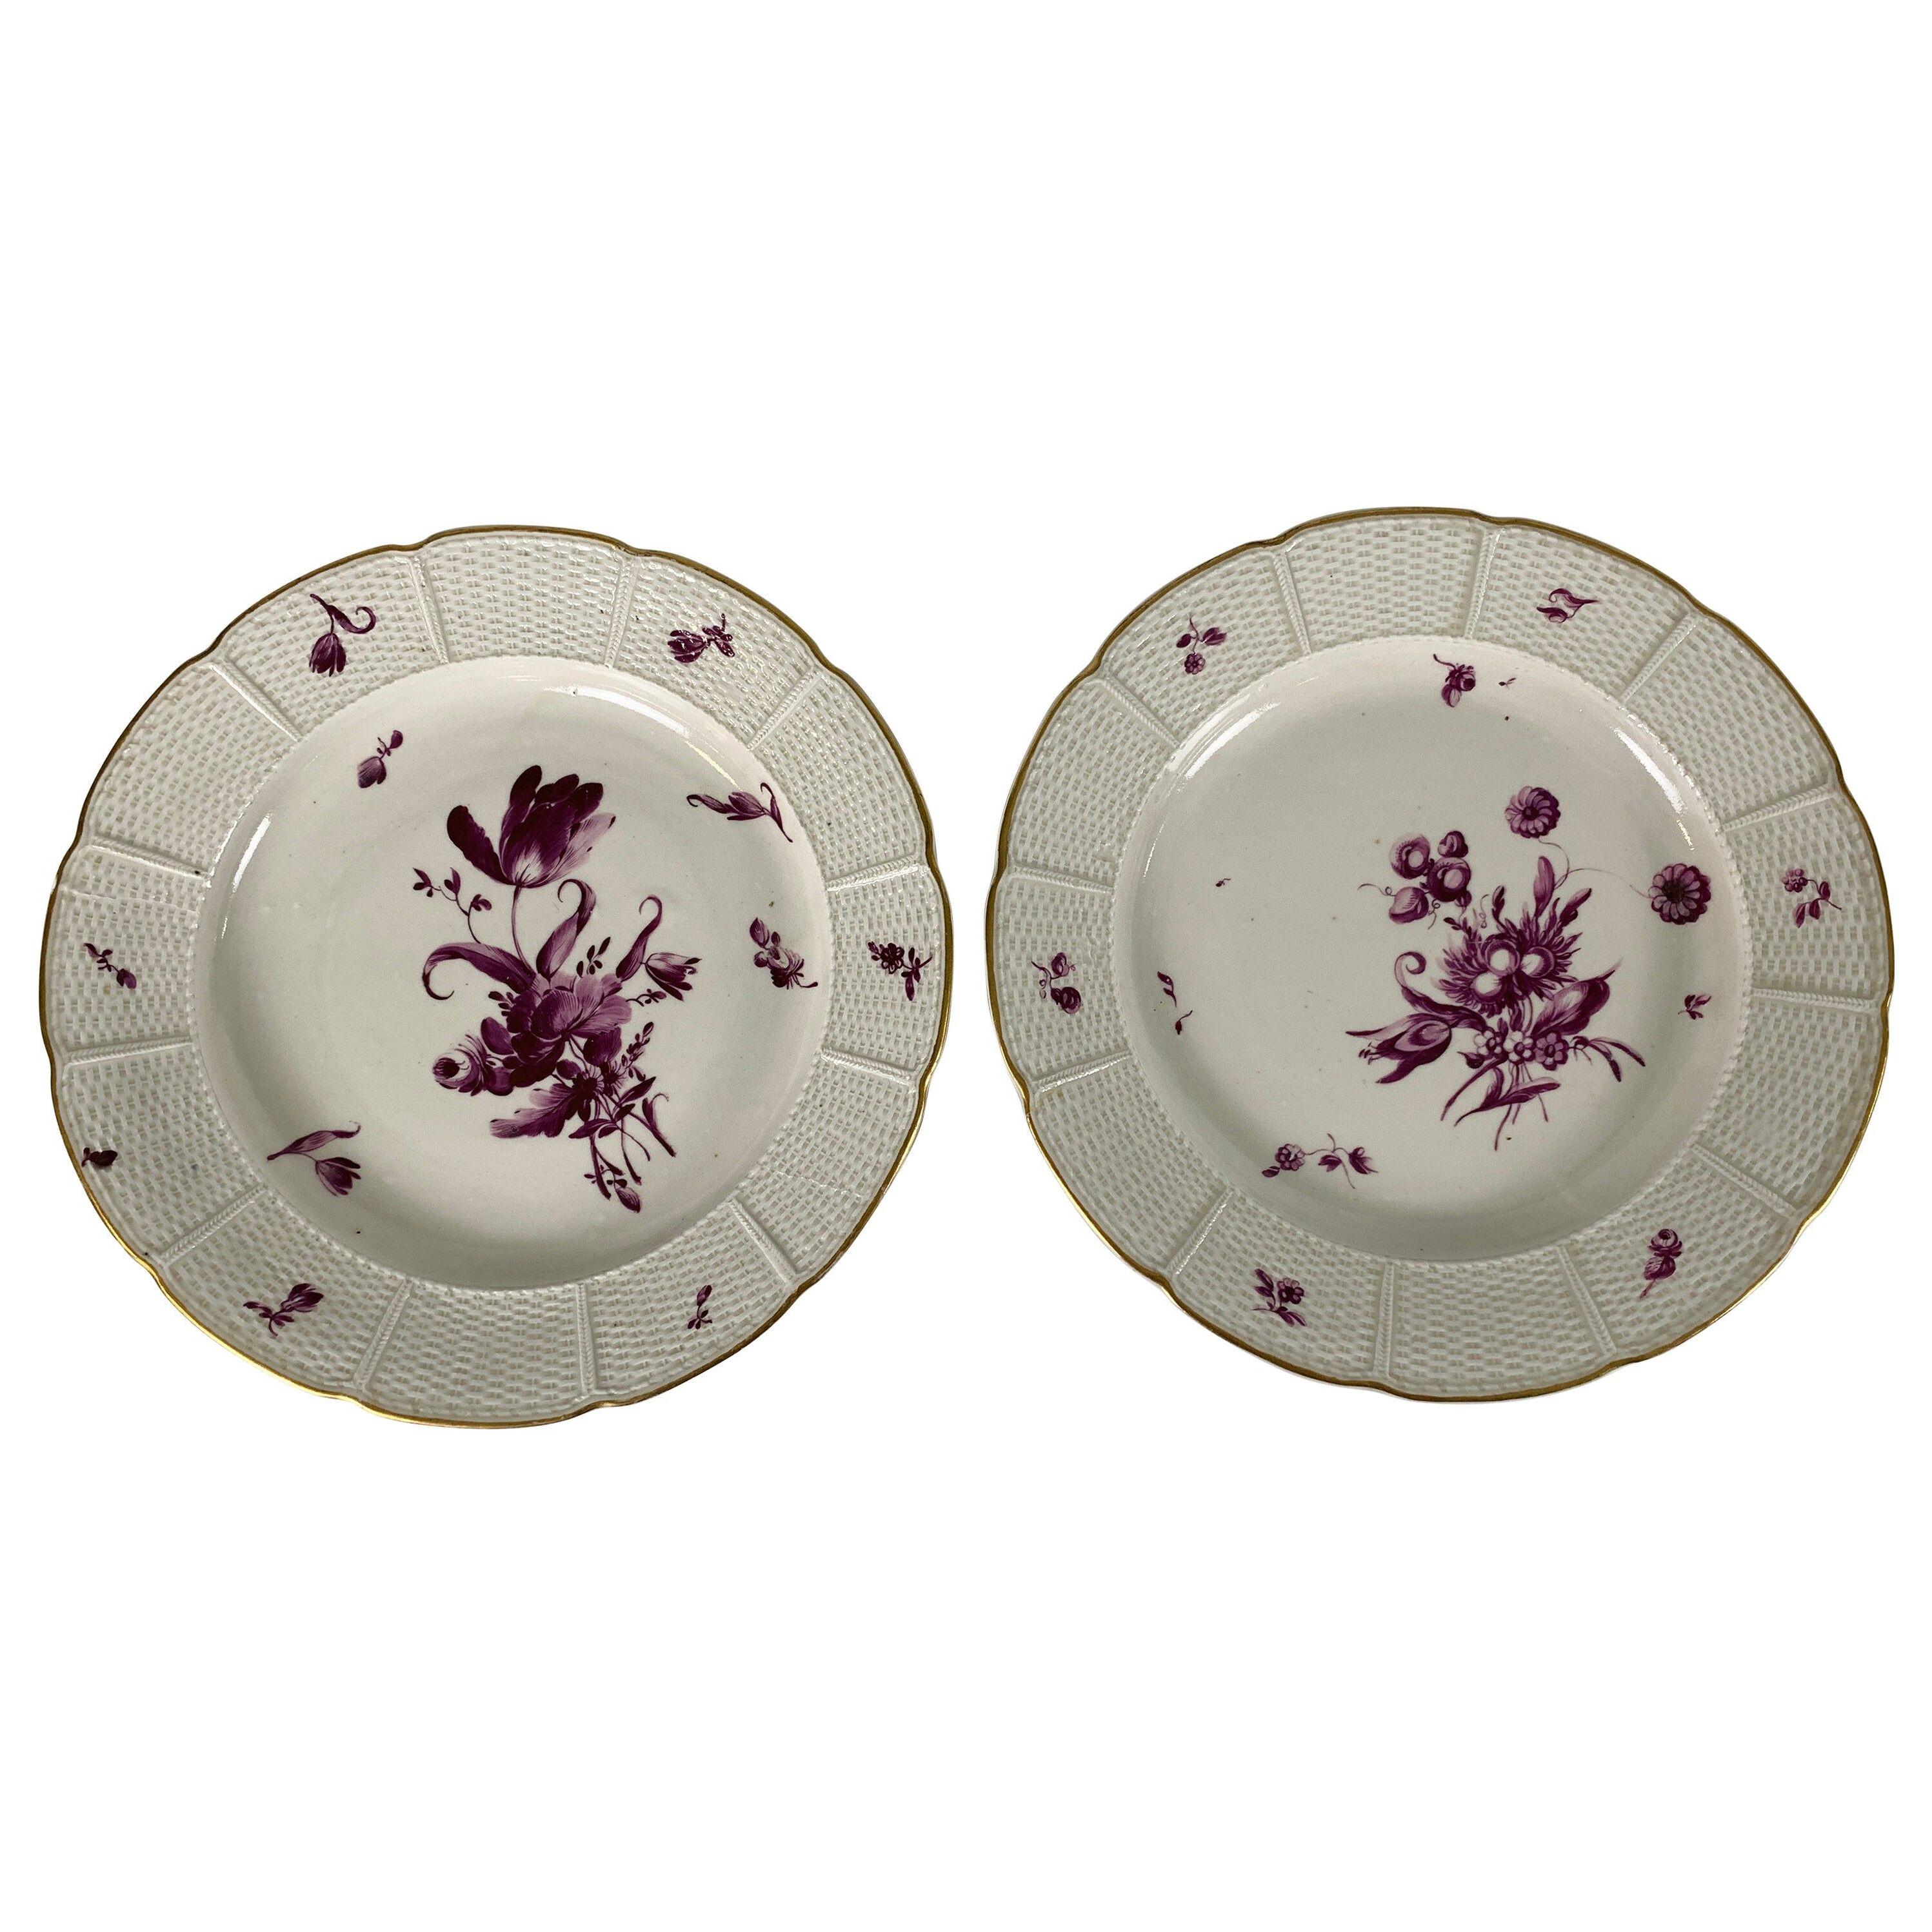 From the Collection of Mario Buatta a Pair of 18th Century Ludwigsburg Dishes